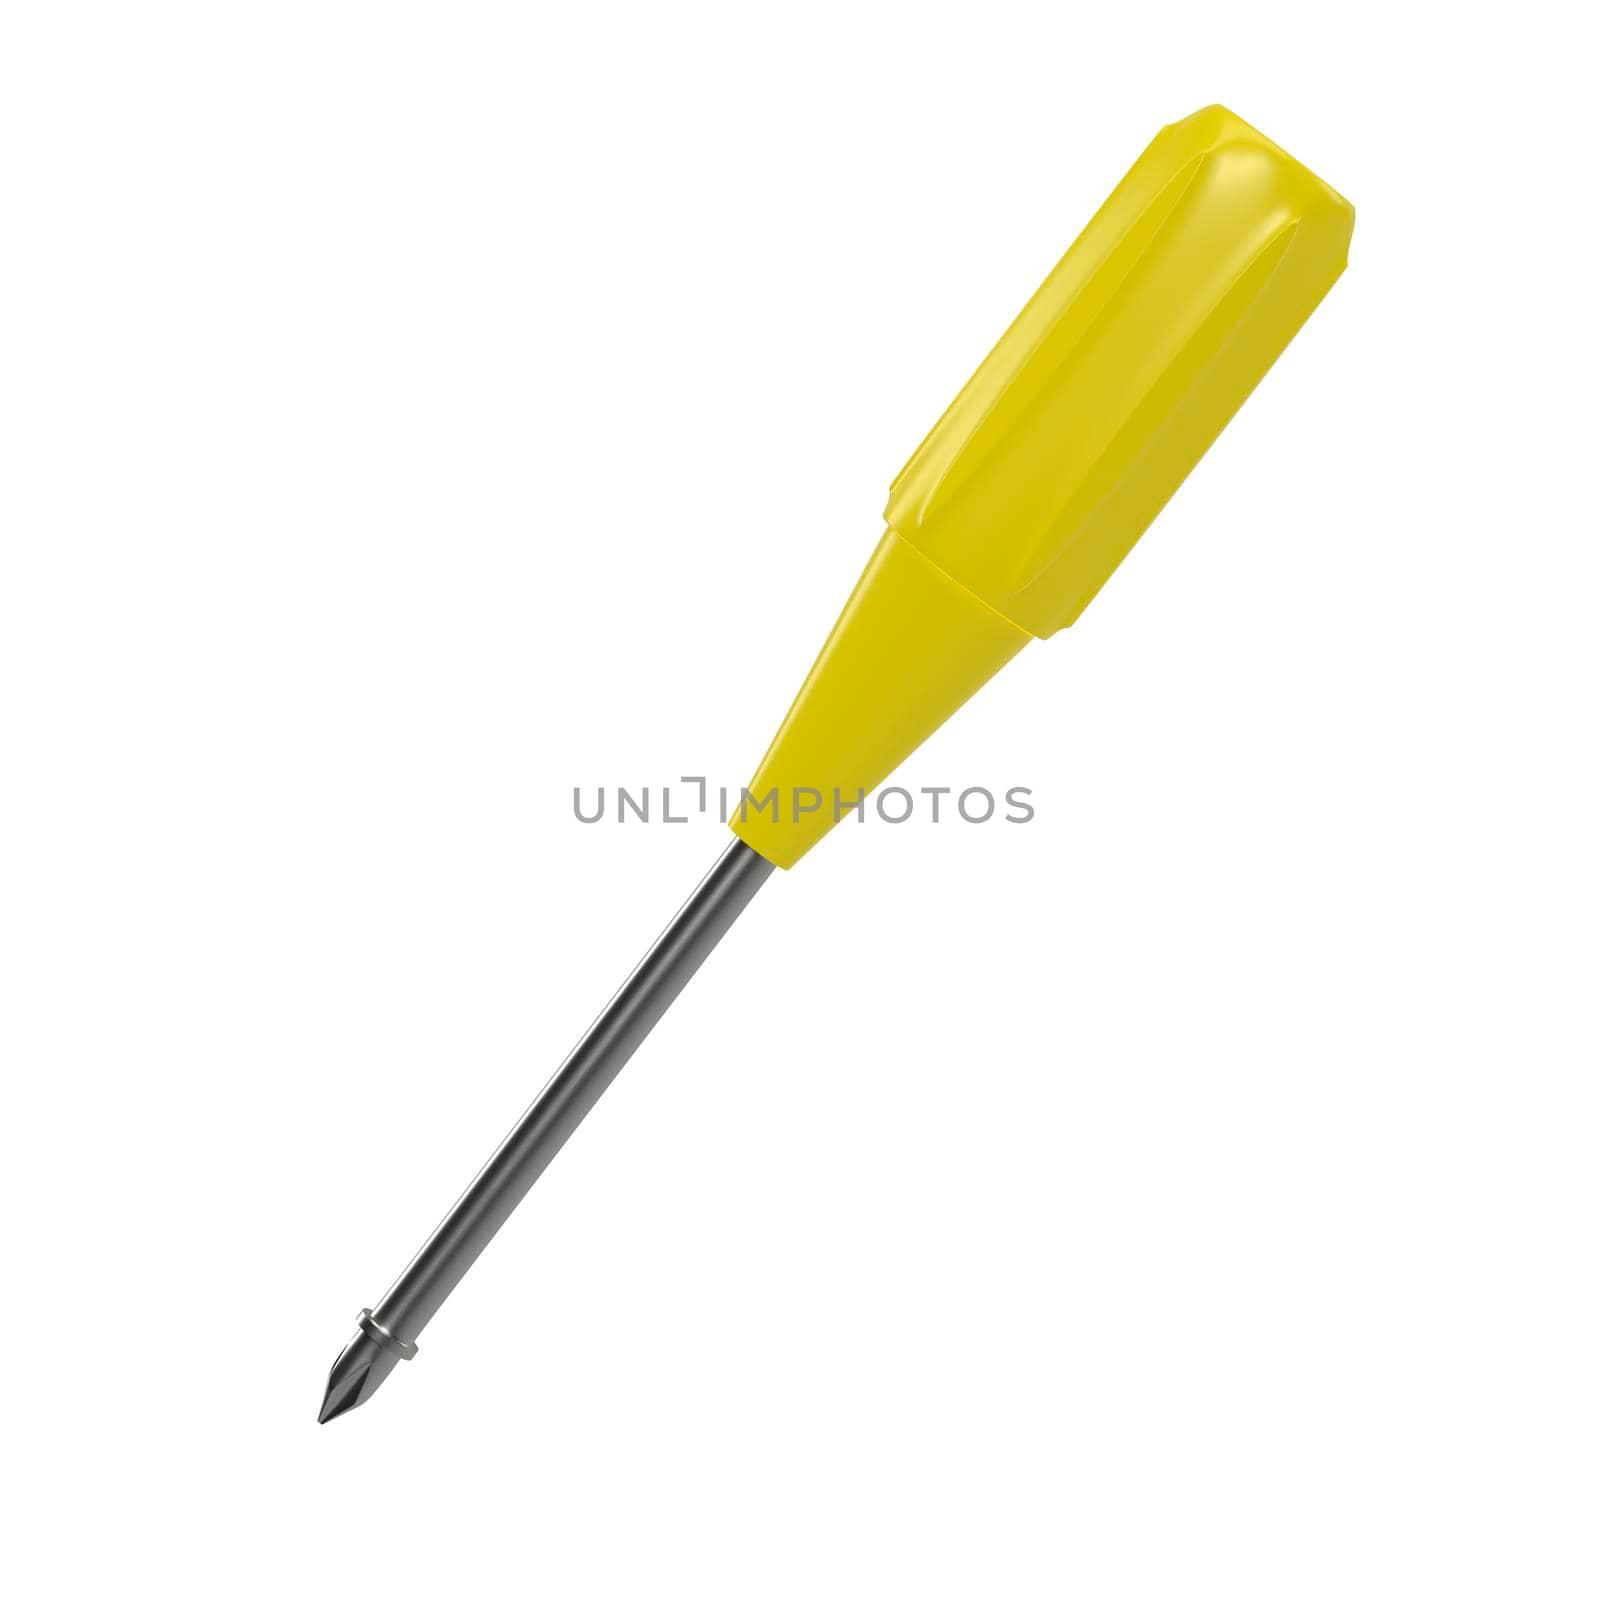 Screwdriver isolated on a white background. 3D rendering by Nobilior